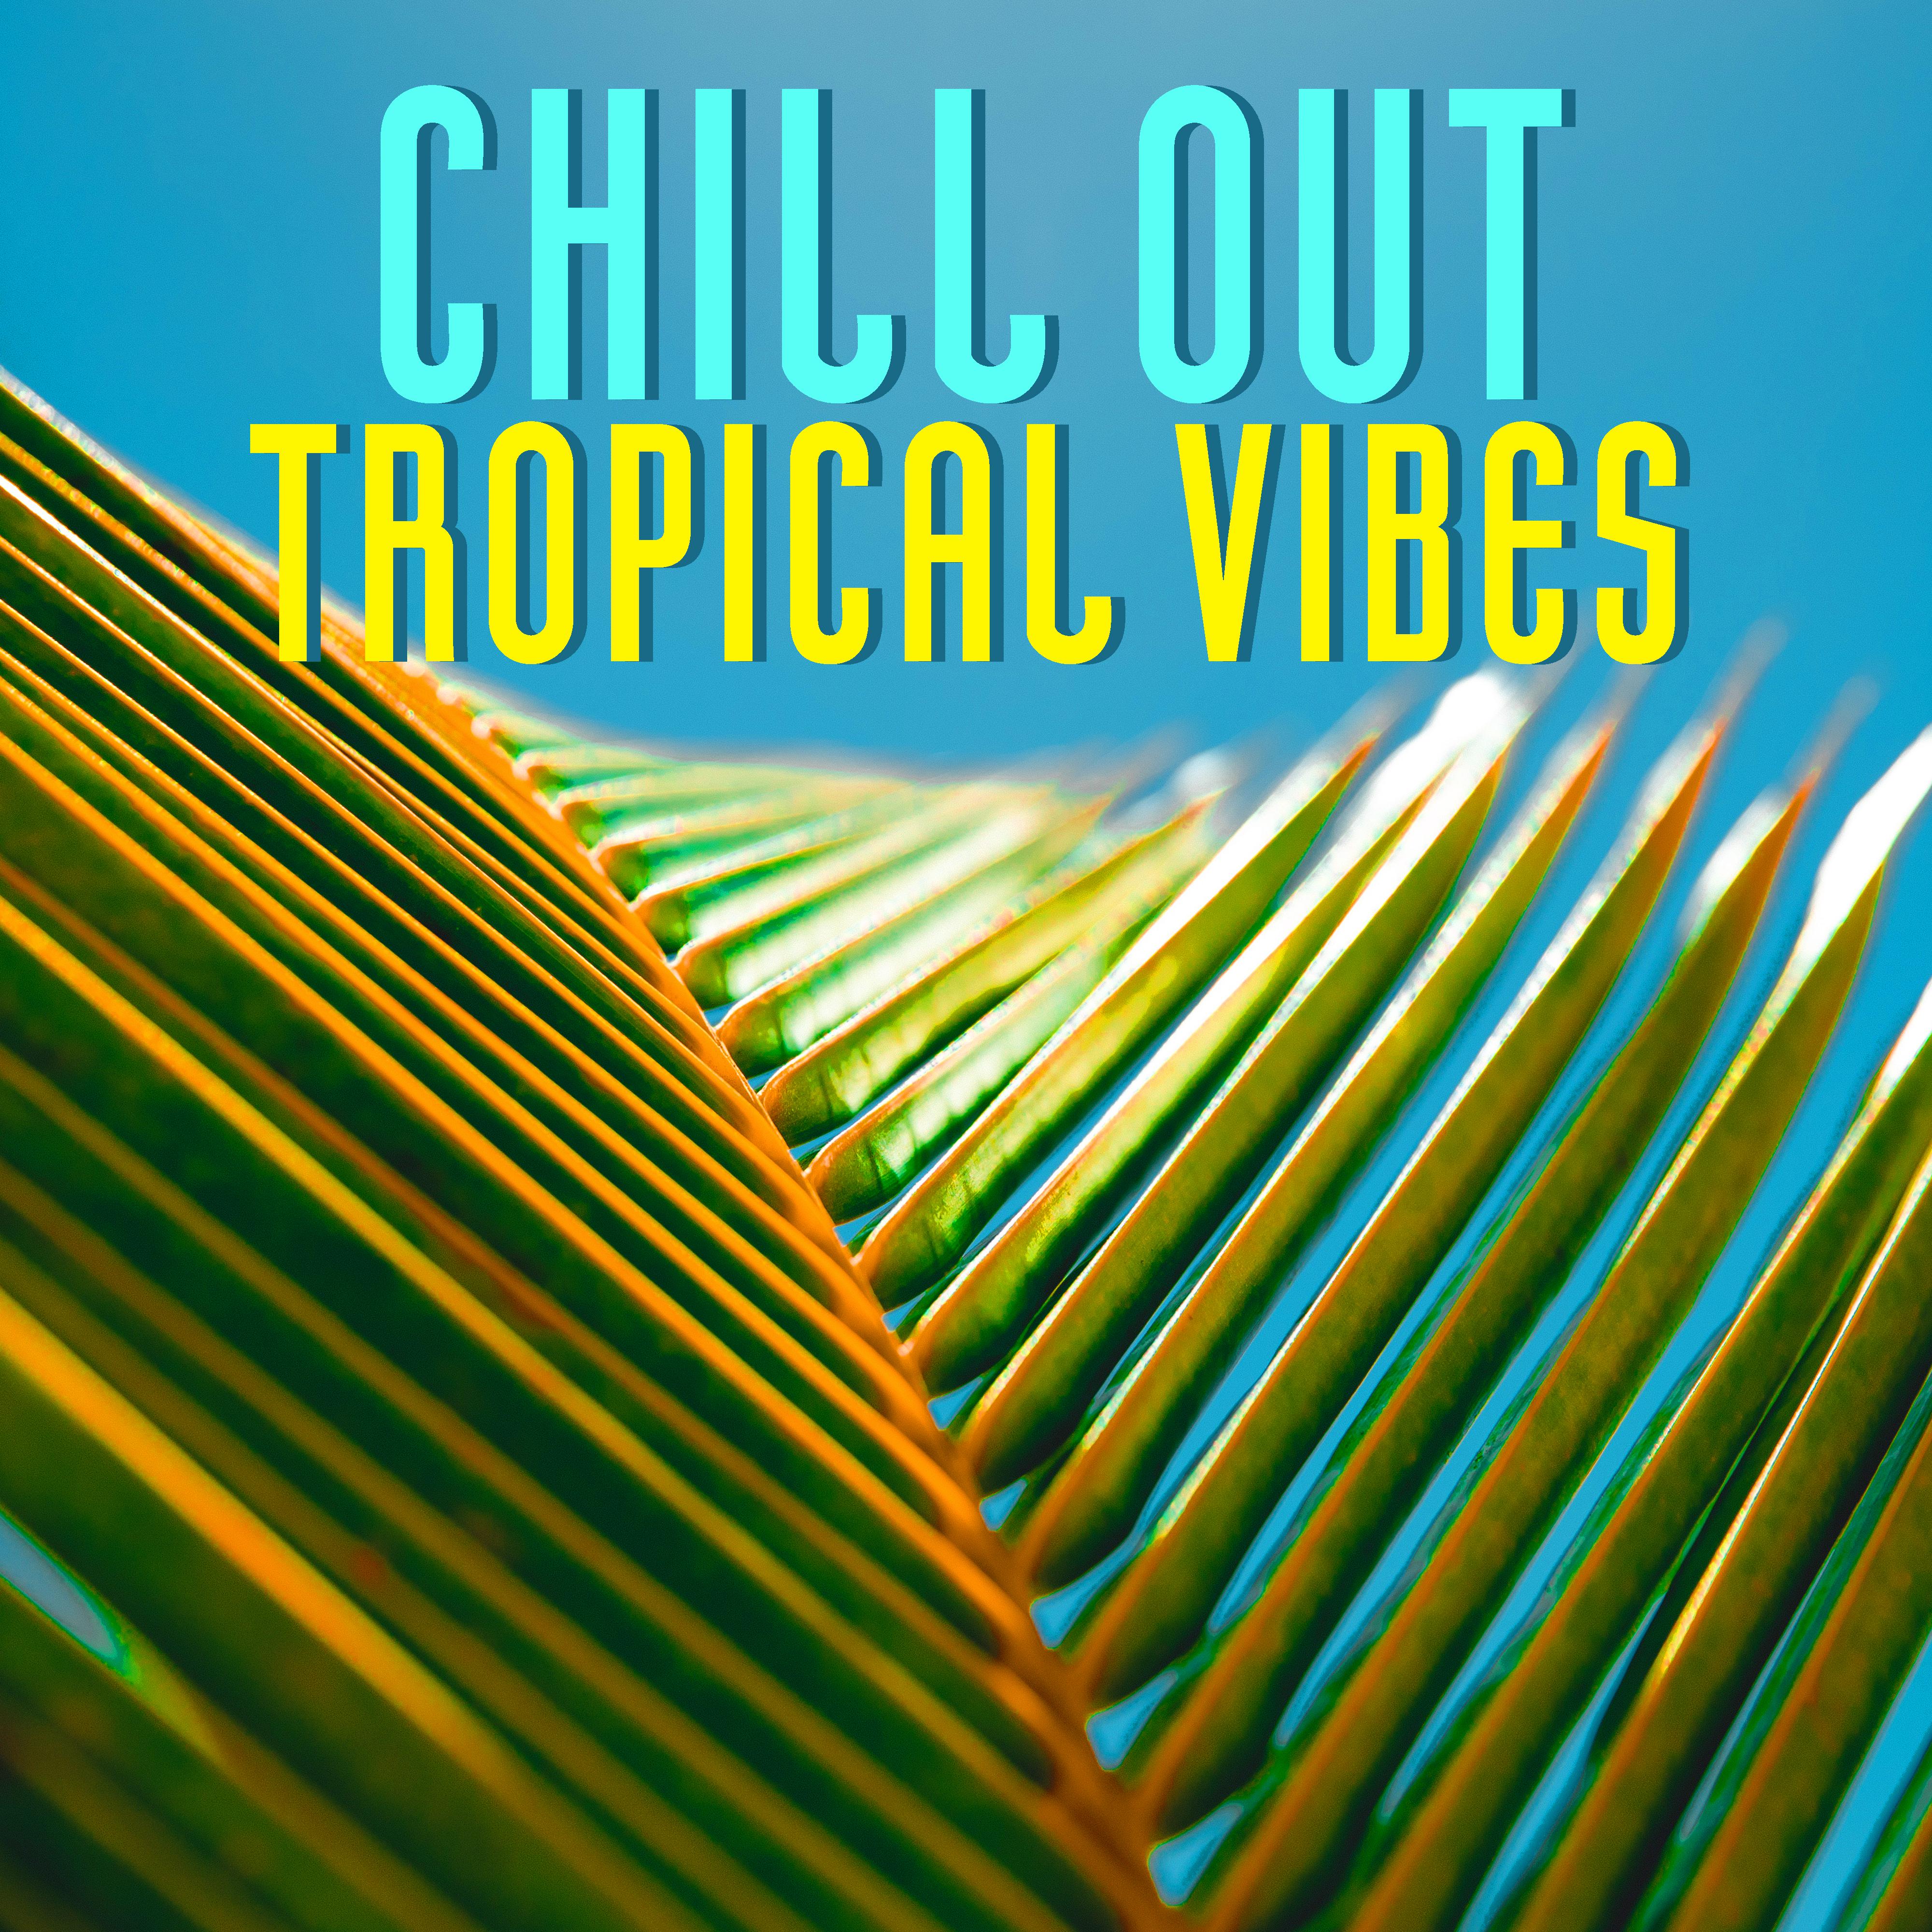 Chill Out Tropical Vibes – Summer Chill Out Music, Easy Listening, Stress Free, Tropical Relaxation